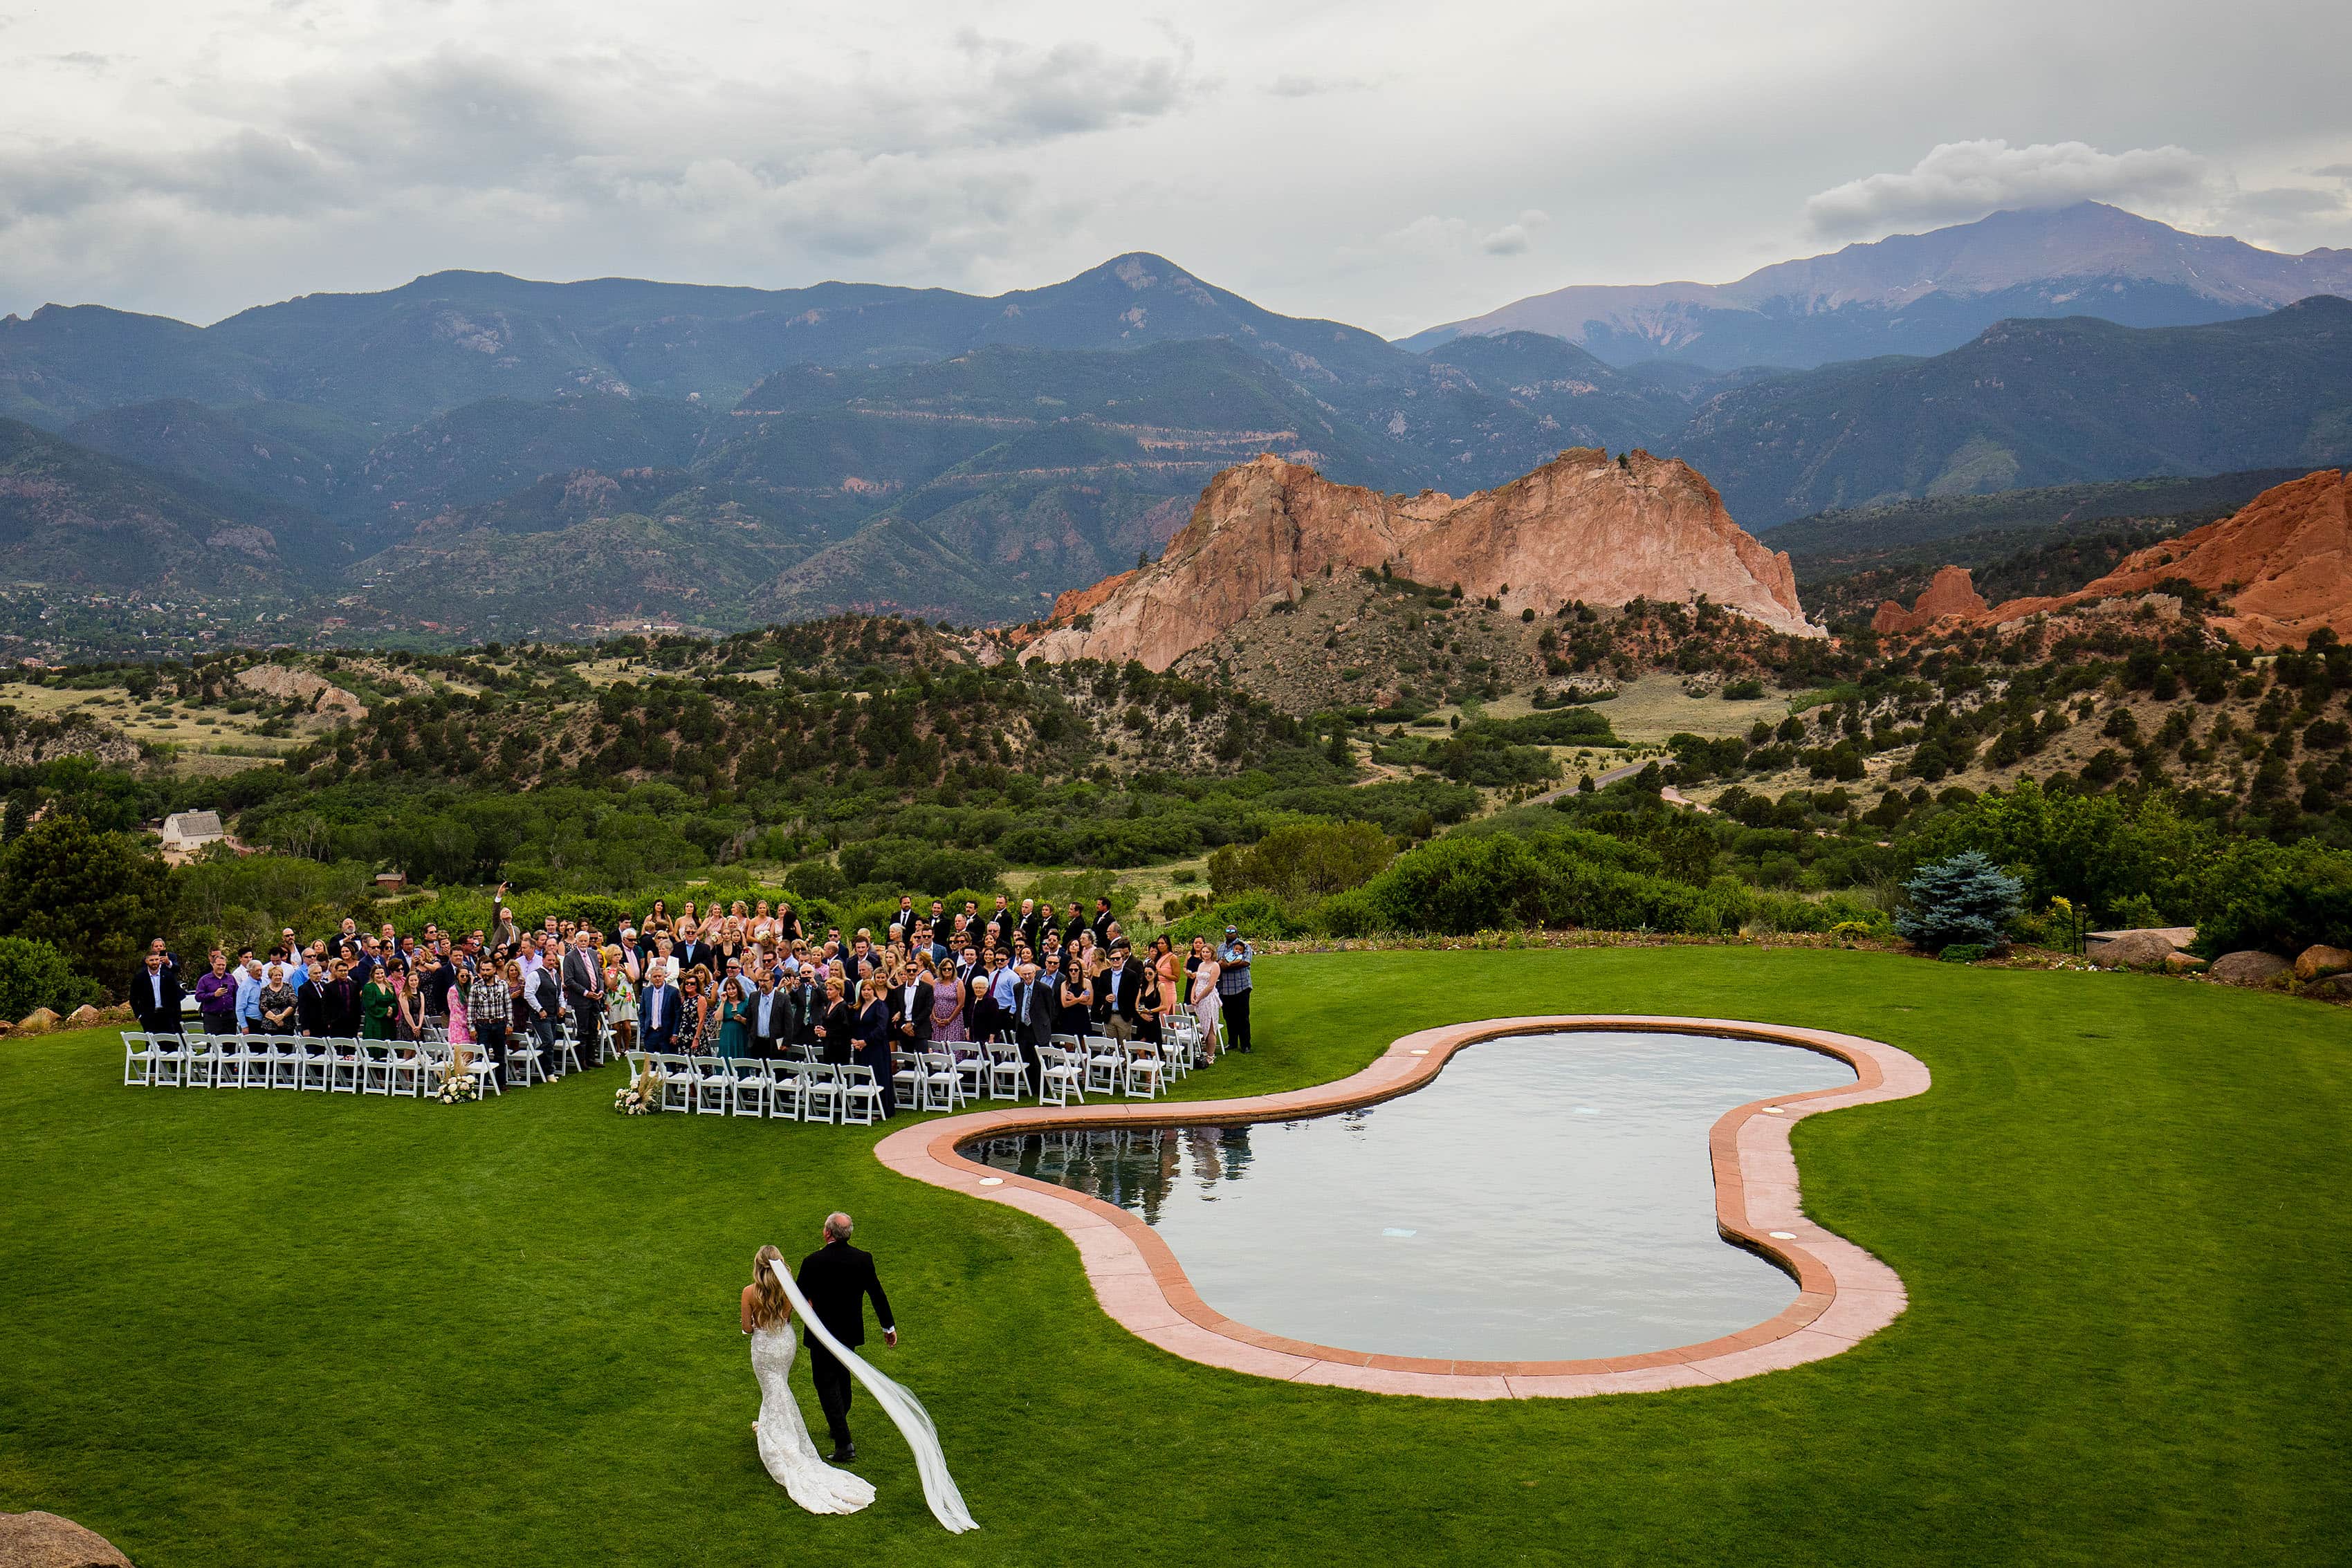 The bride and her father walk on the lawn during the wedding ceremony at Garden of the Gods Resort in Colorado Springs